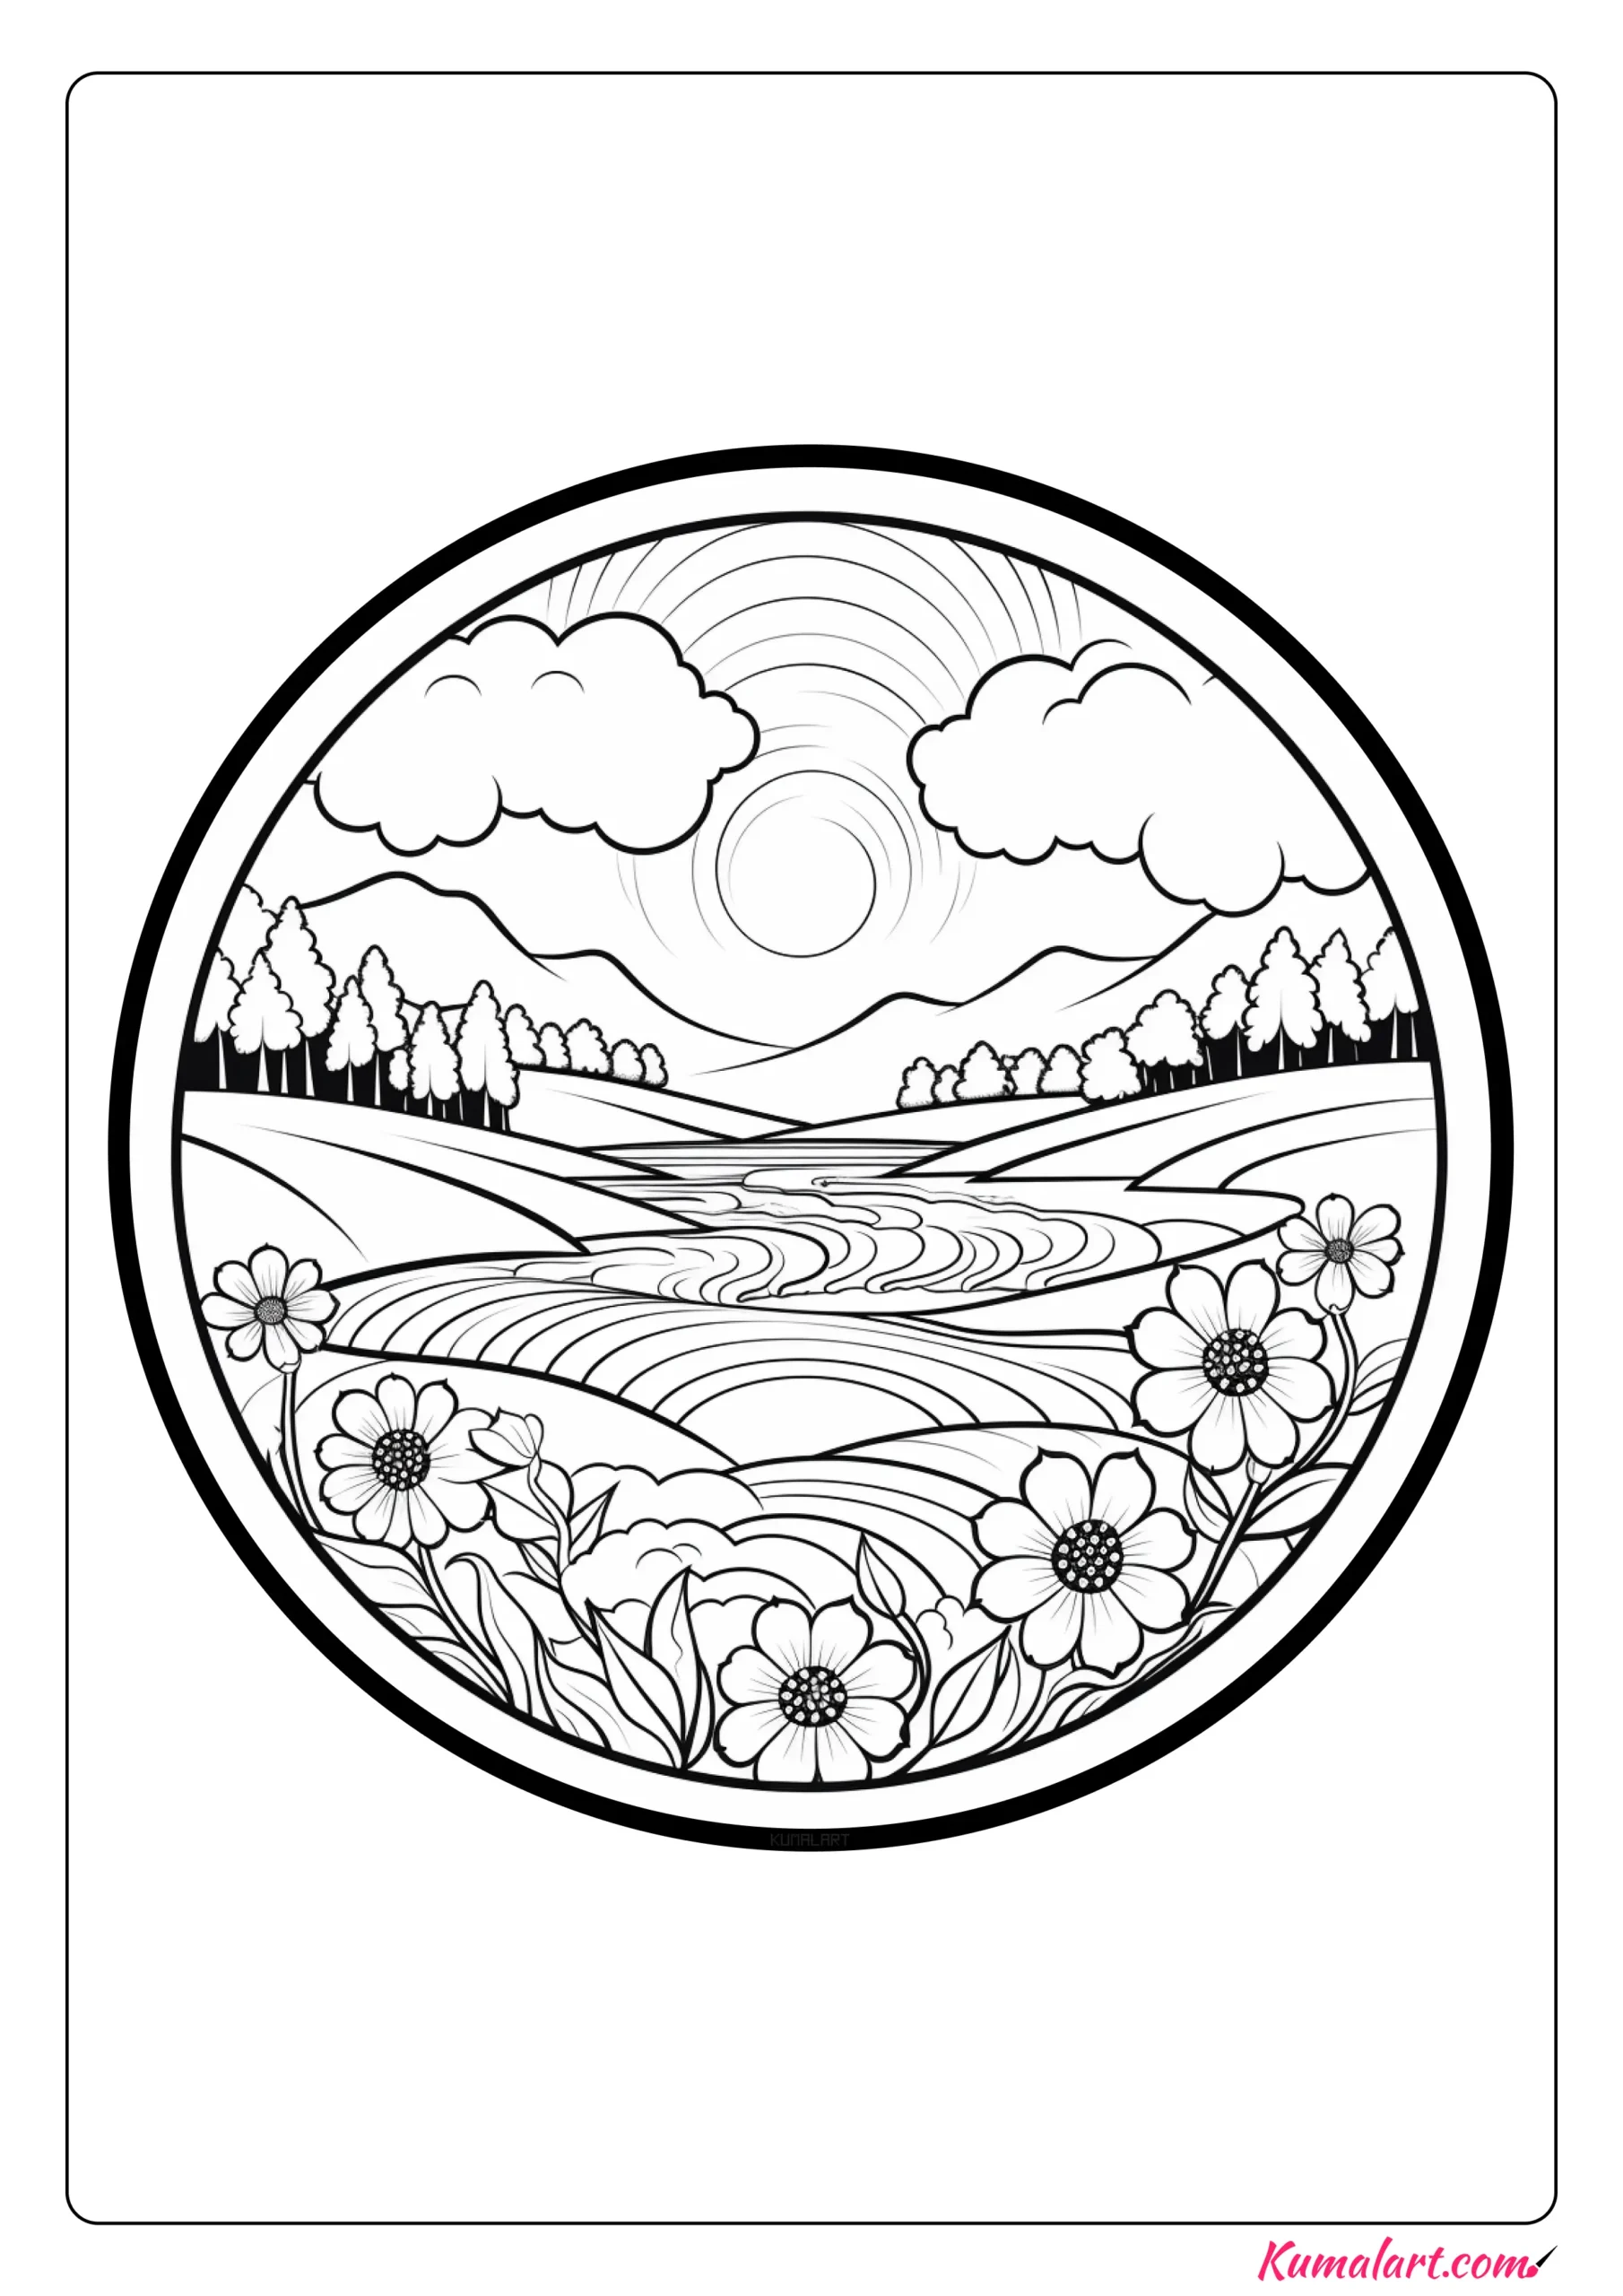 Lively Spring Coloring Page